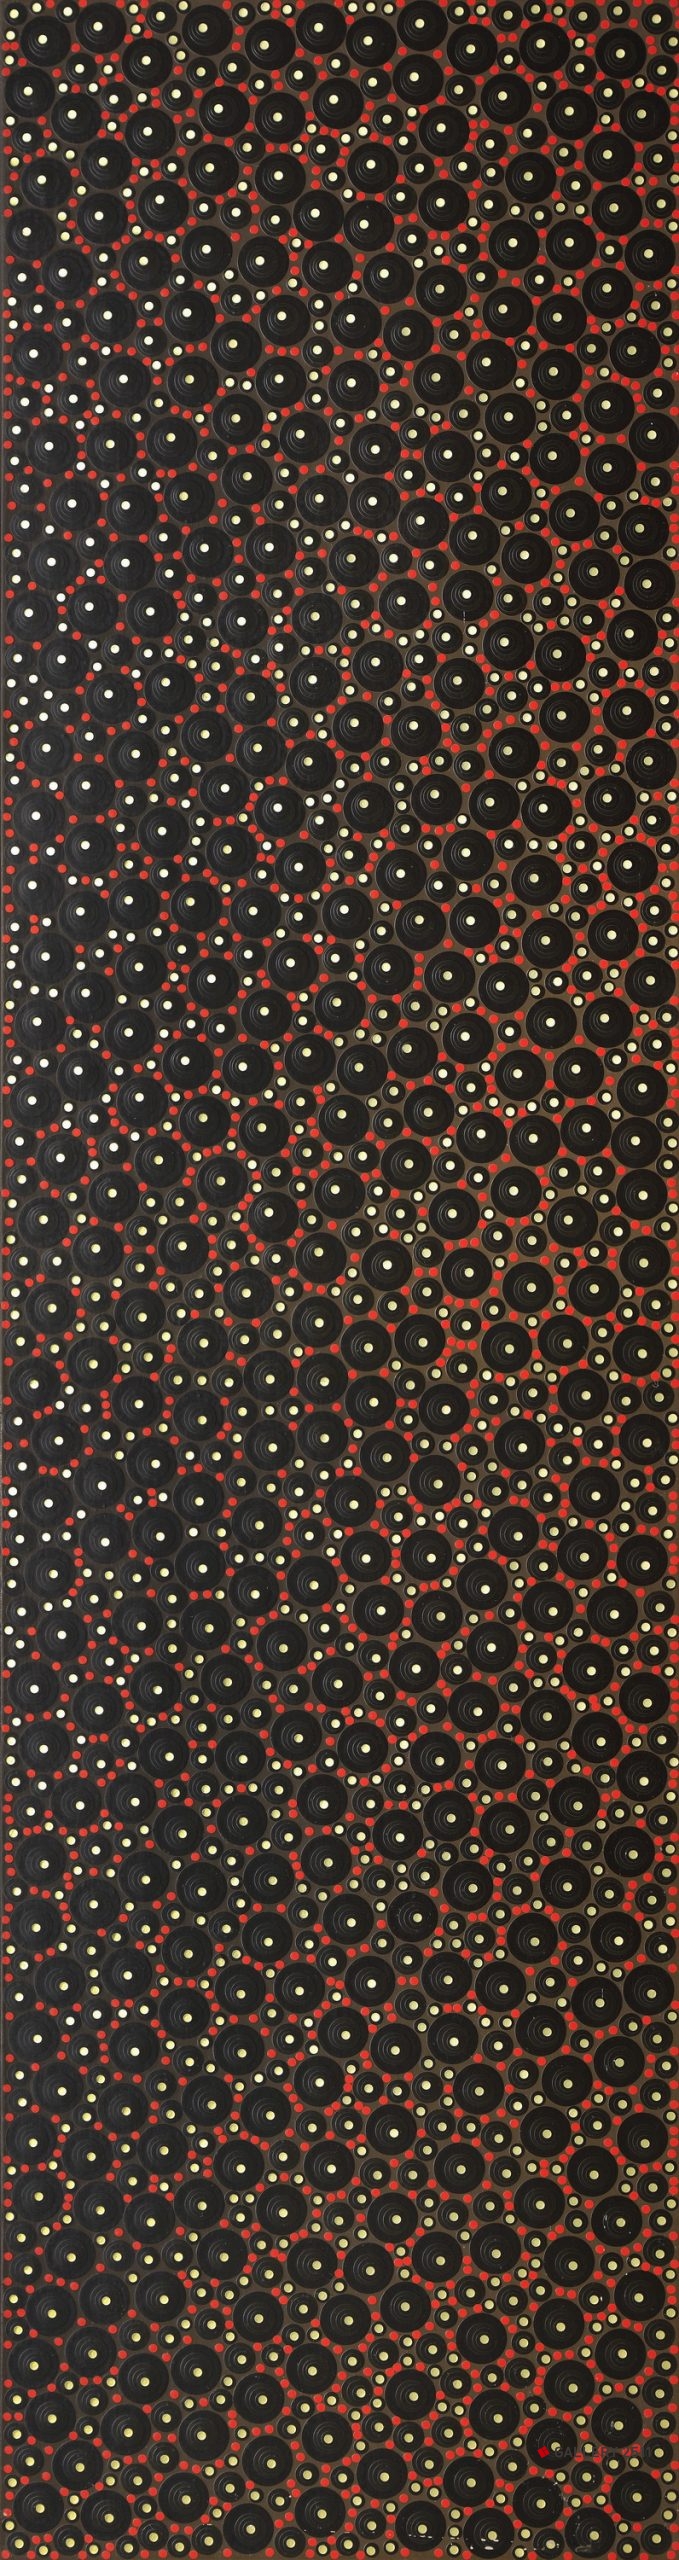 No.083 -「black and small red.gold on dark brown」
 画布、标签, 
 W405mm × H1500mm, 
 1995